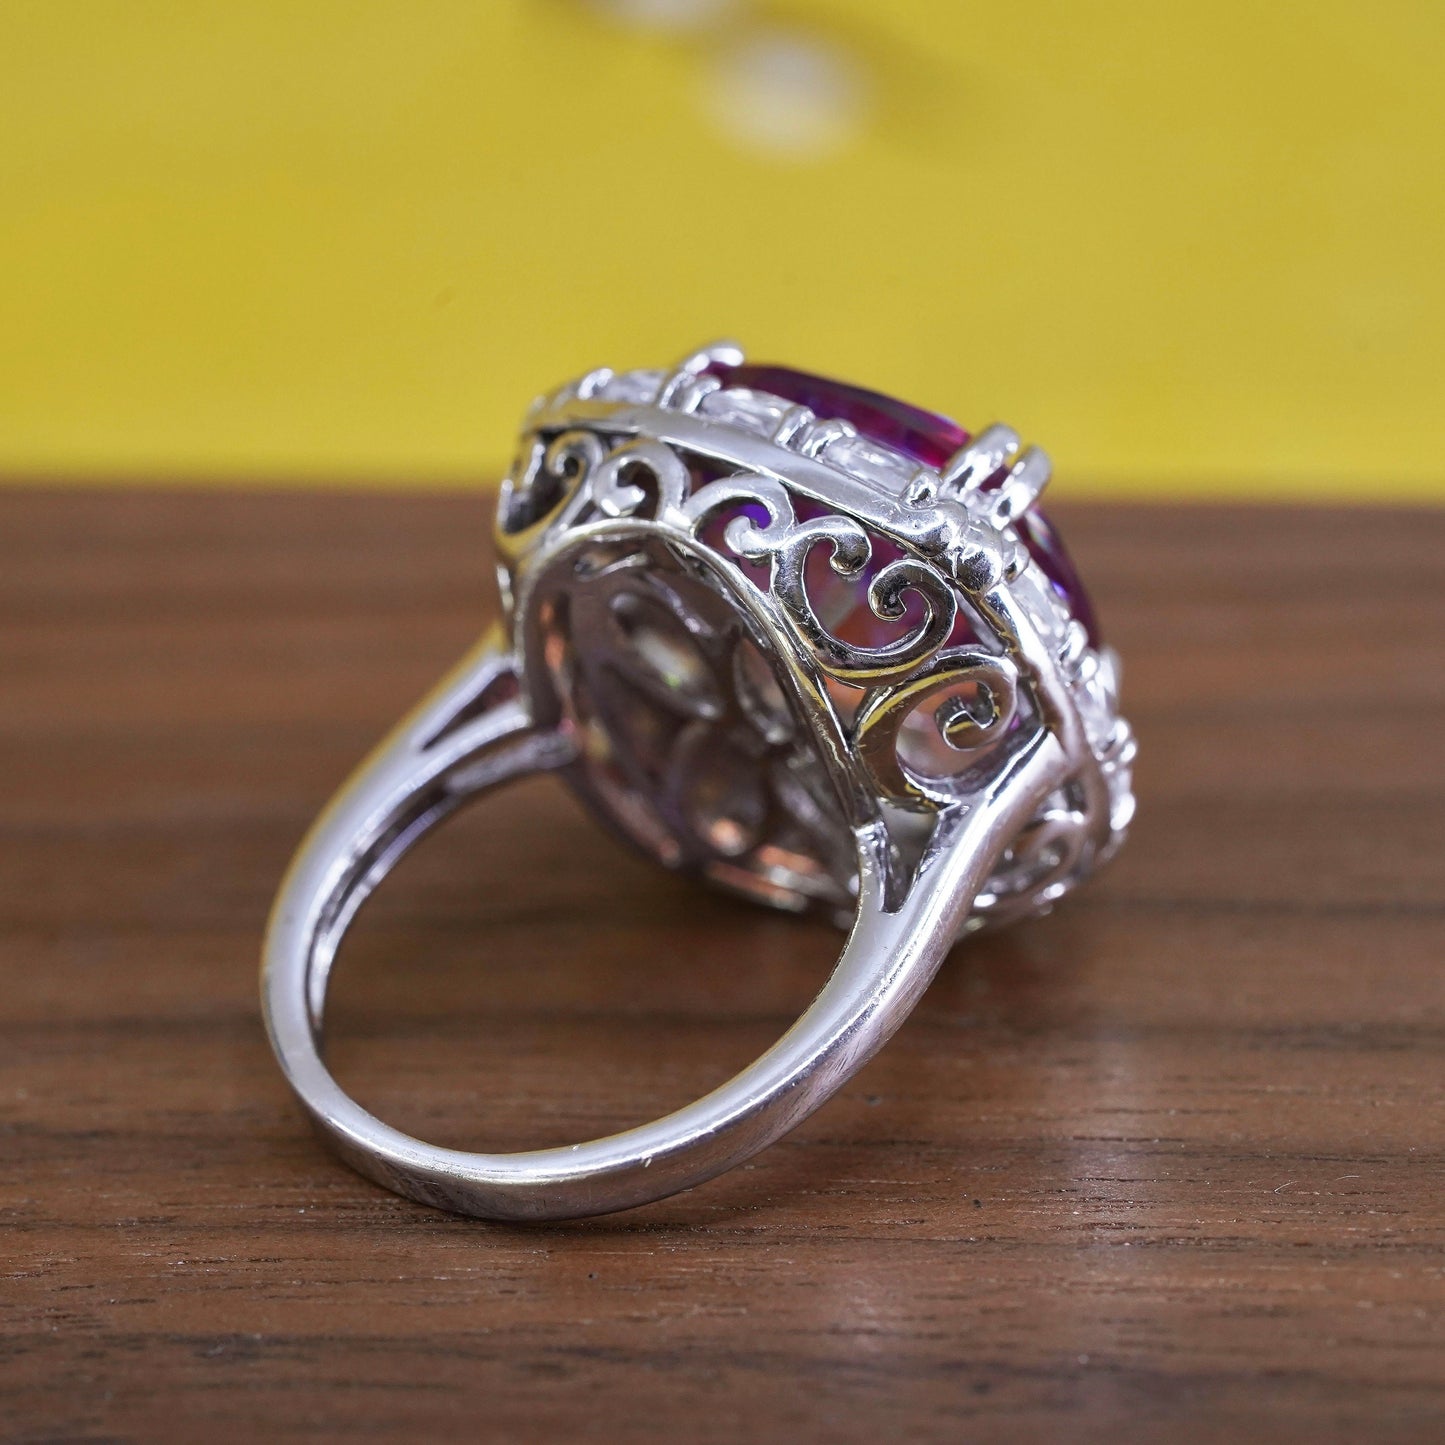 Size 7.75, vintage Sterling 925 silver statement cocktail ring w/ pink crystal